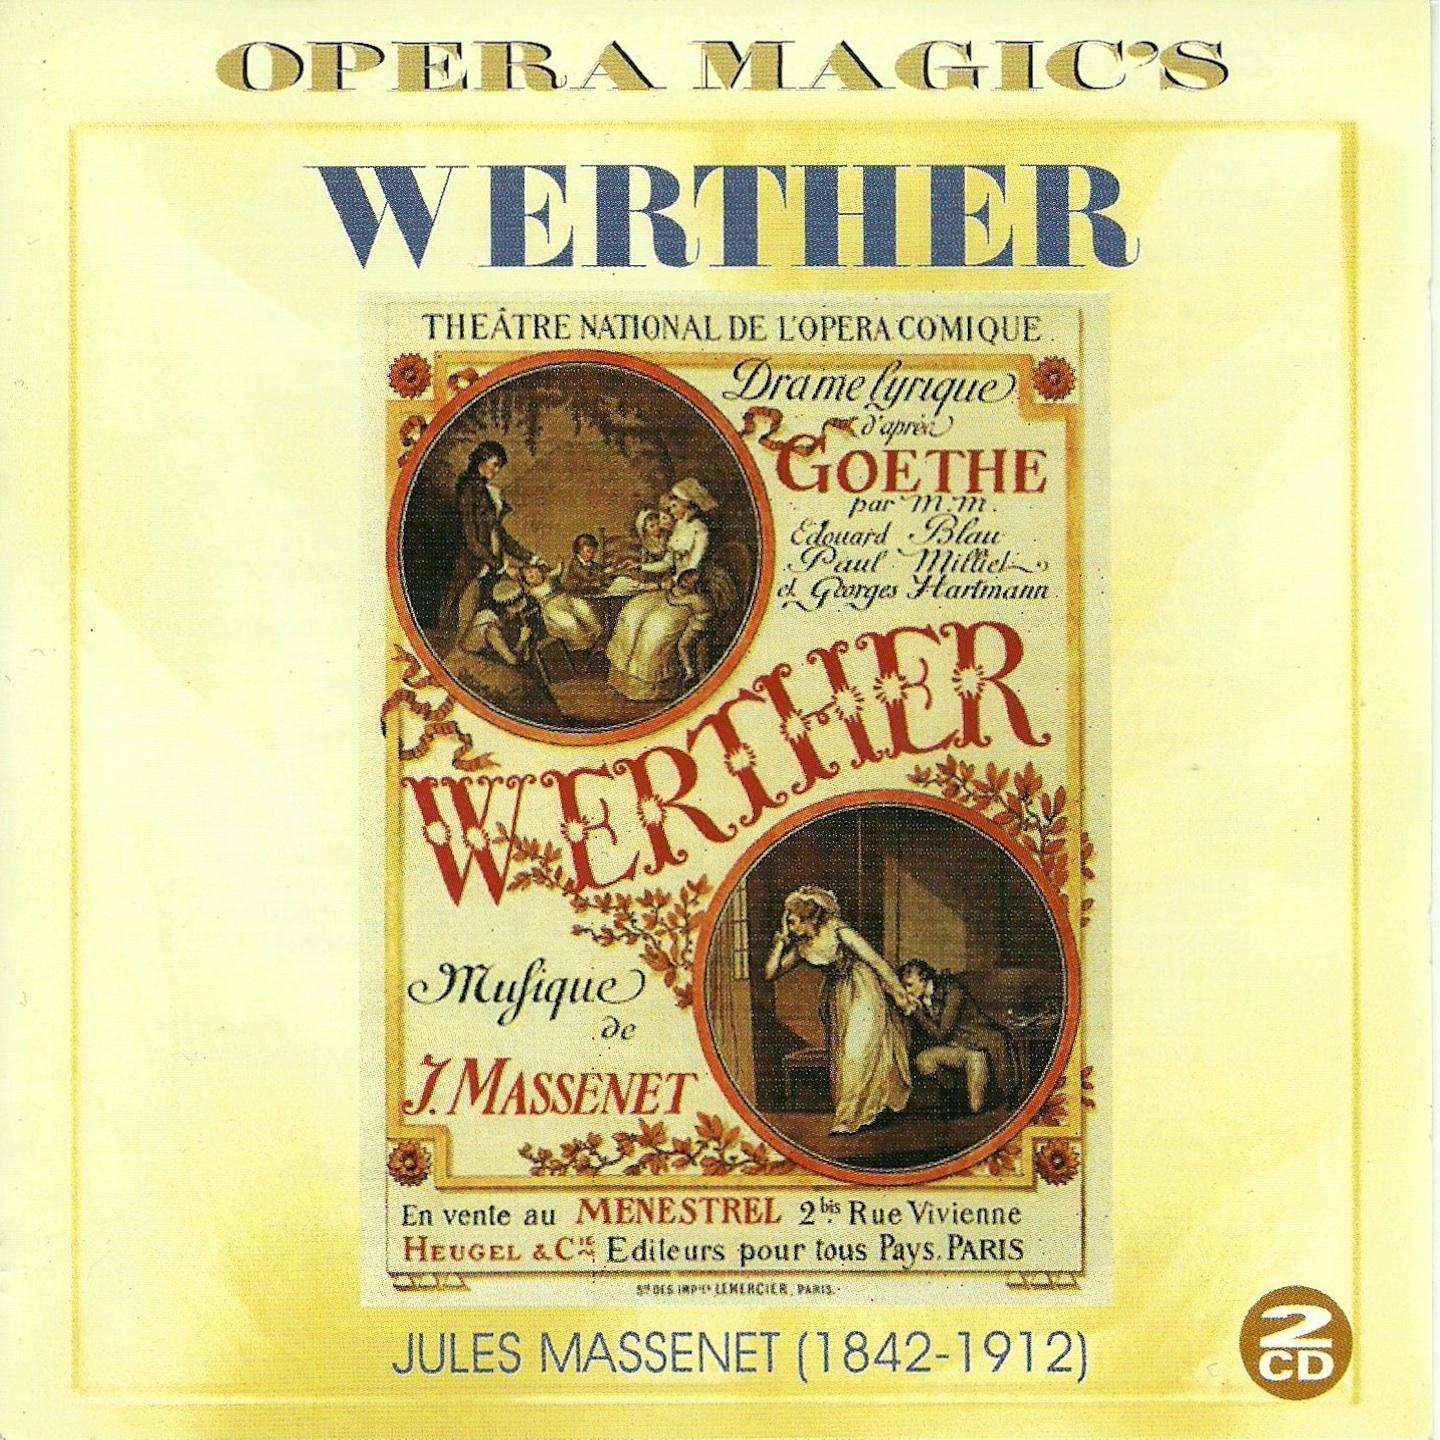 Werther, Act III: " Pre lude"